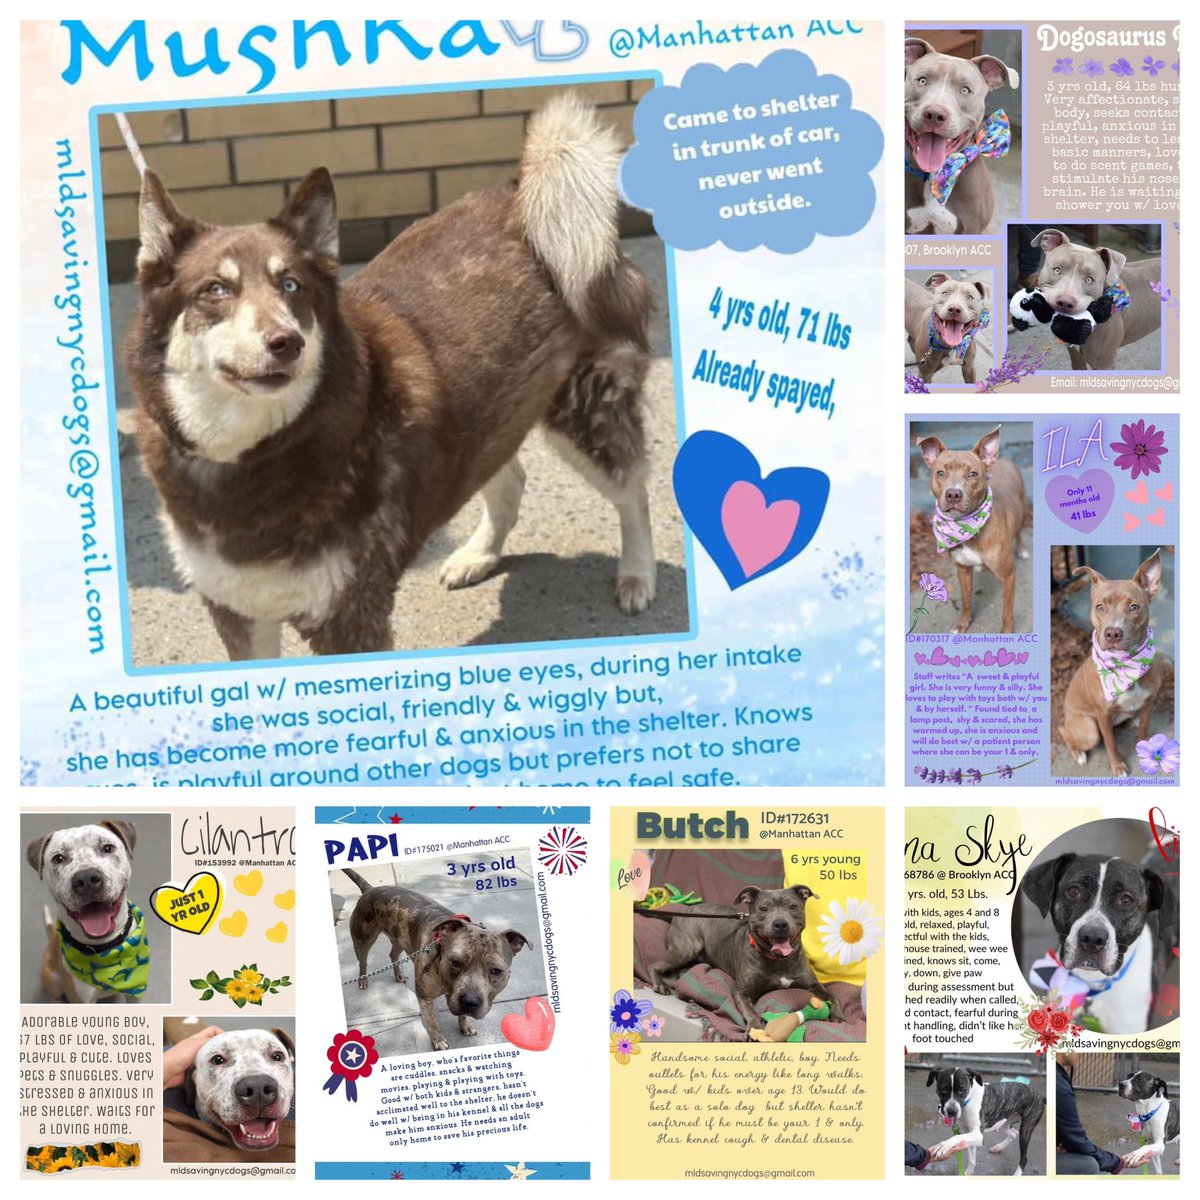 Please see tweets below for Mushka, Dogosaurus Rex, Ila, Cilantro, Papi, Butch and Luna Skye - they are not getting a lot of attention and need some RTs and pledges if you can. Their tweets are in the replies. Thank you so much.